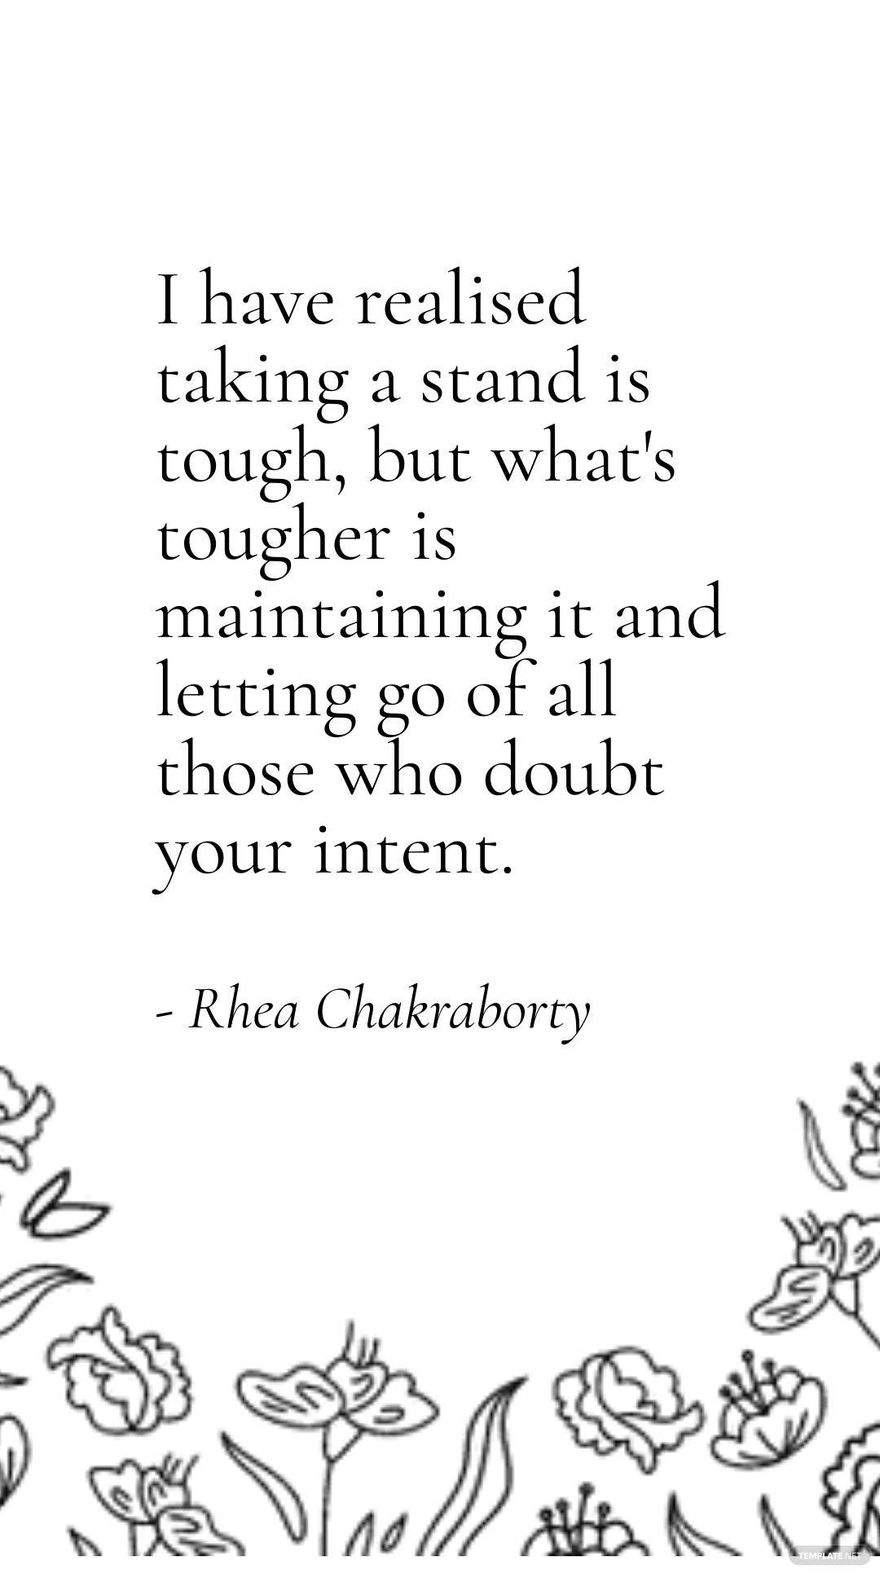 Free Rhea Chakraborty - I have realised taking a stand is tough, but what's tougher is maintaining it and letting go of all those who doubt your intent. in JPG